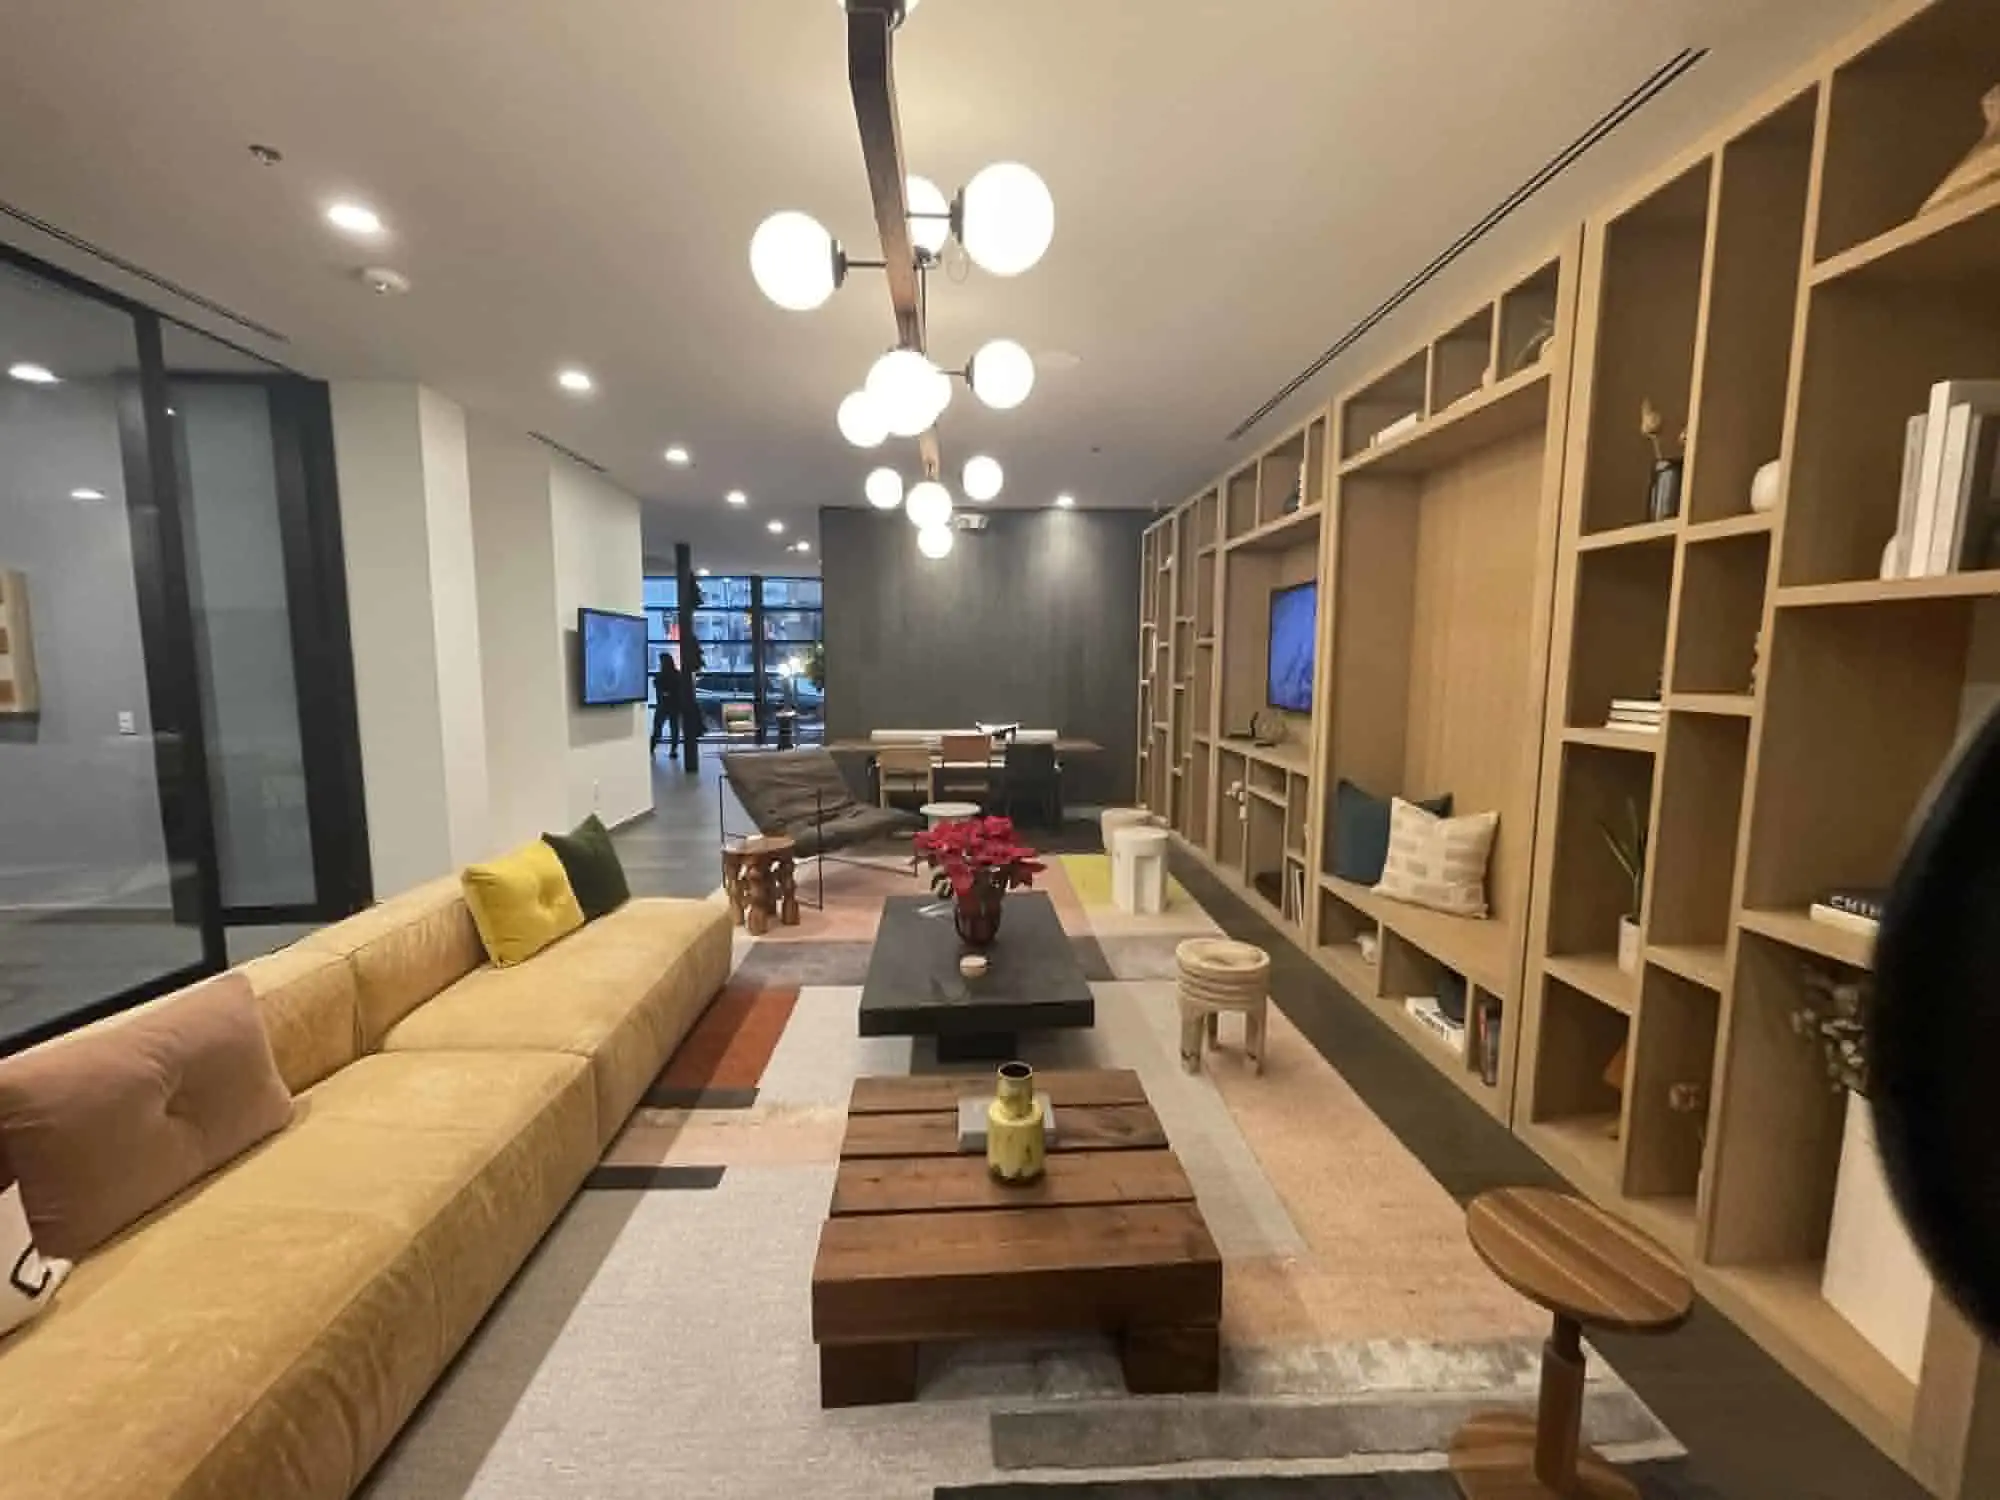 living/dining room area located inside of a skyscraper in Downtown Austin's Rainey Street District that can be used for AirBNB